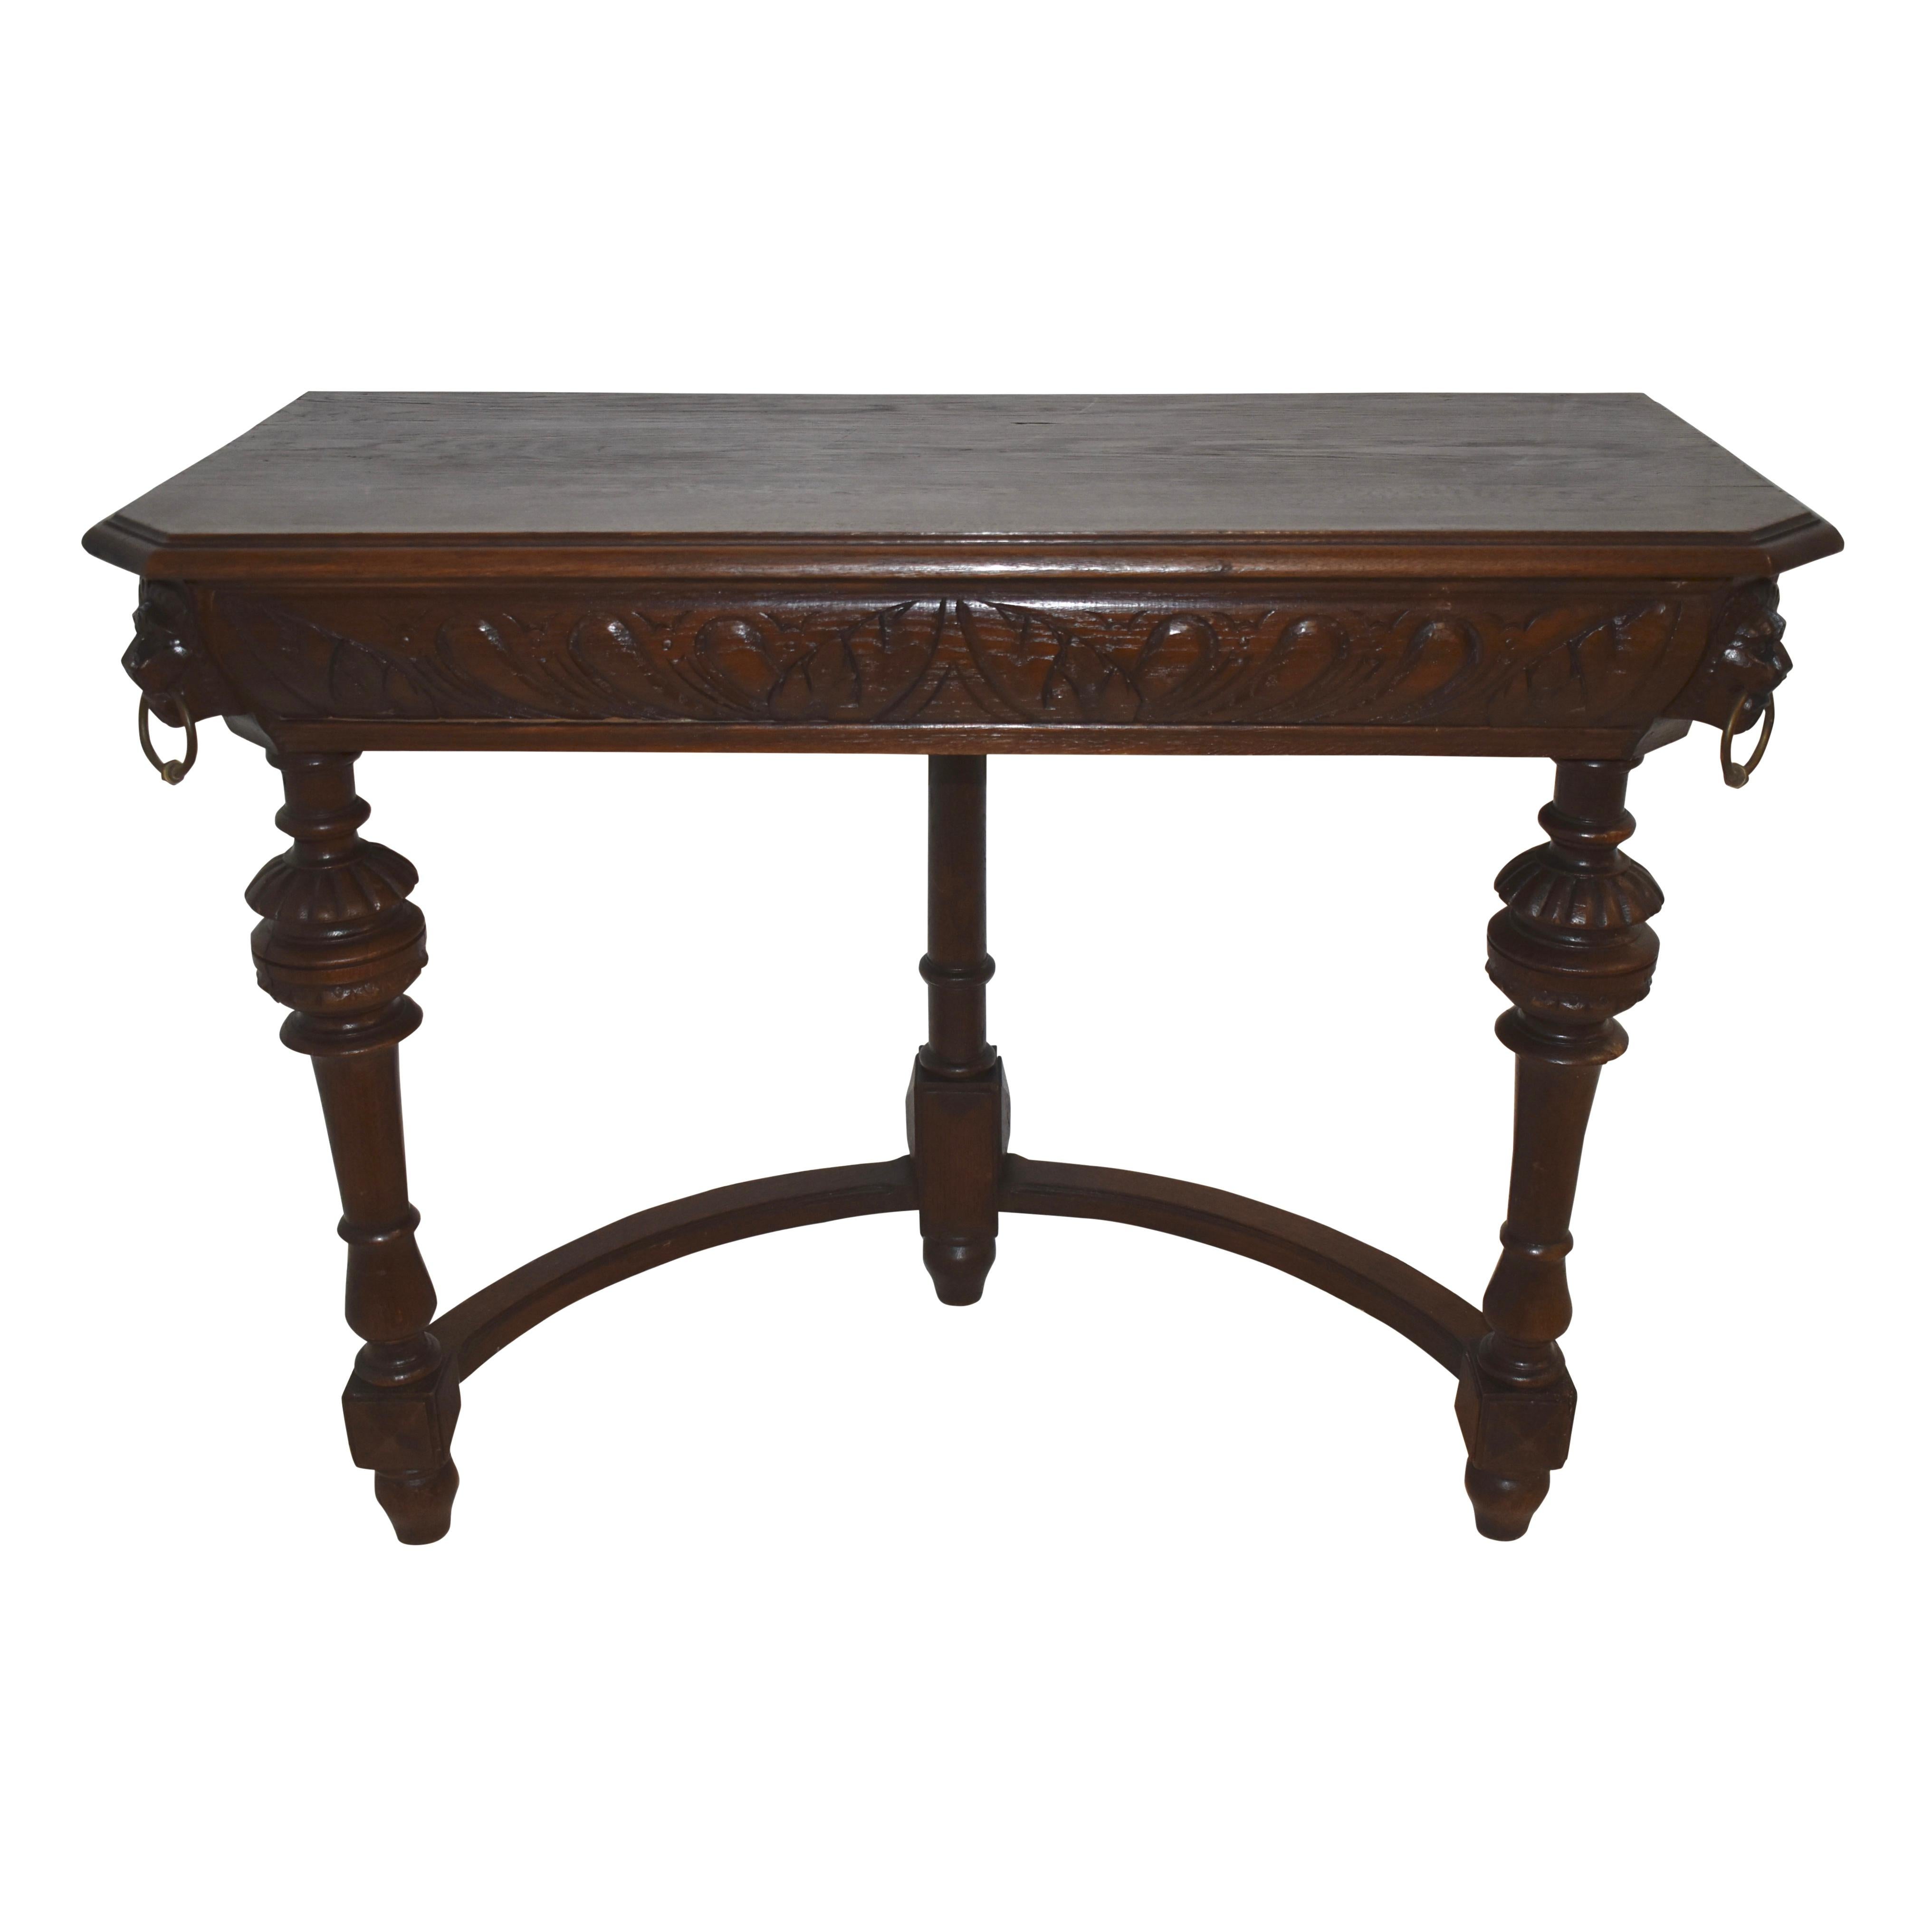 Supported by three turned legs united by a semicircle stretcher, this elegant hall table features carved lion heads with brass rings in their mouths at the table's canted corners. A beveled top, carved apron, and dark stain enhance the table's